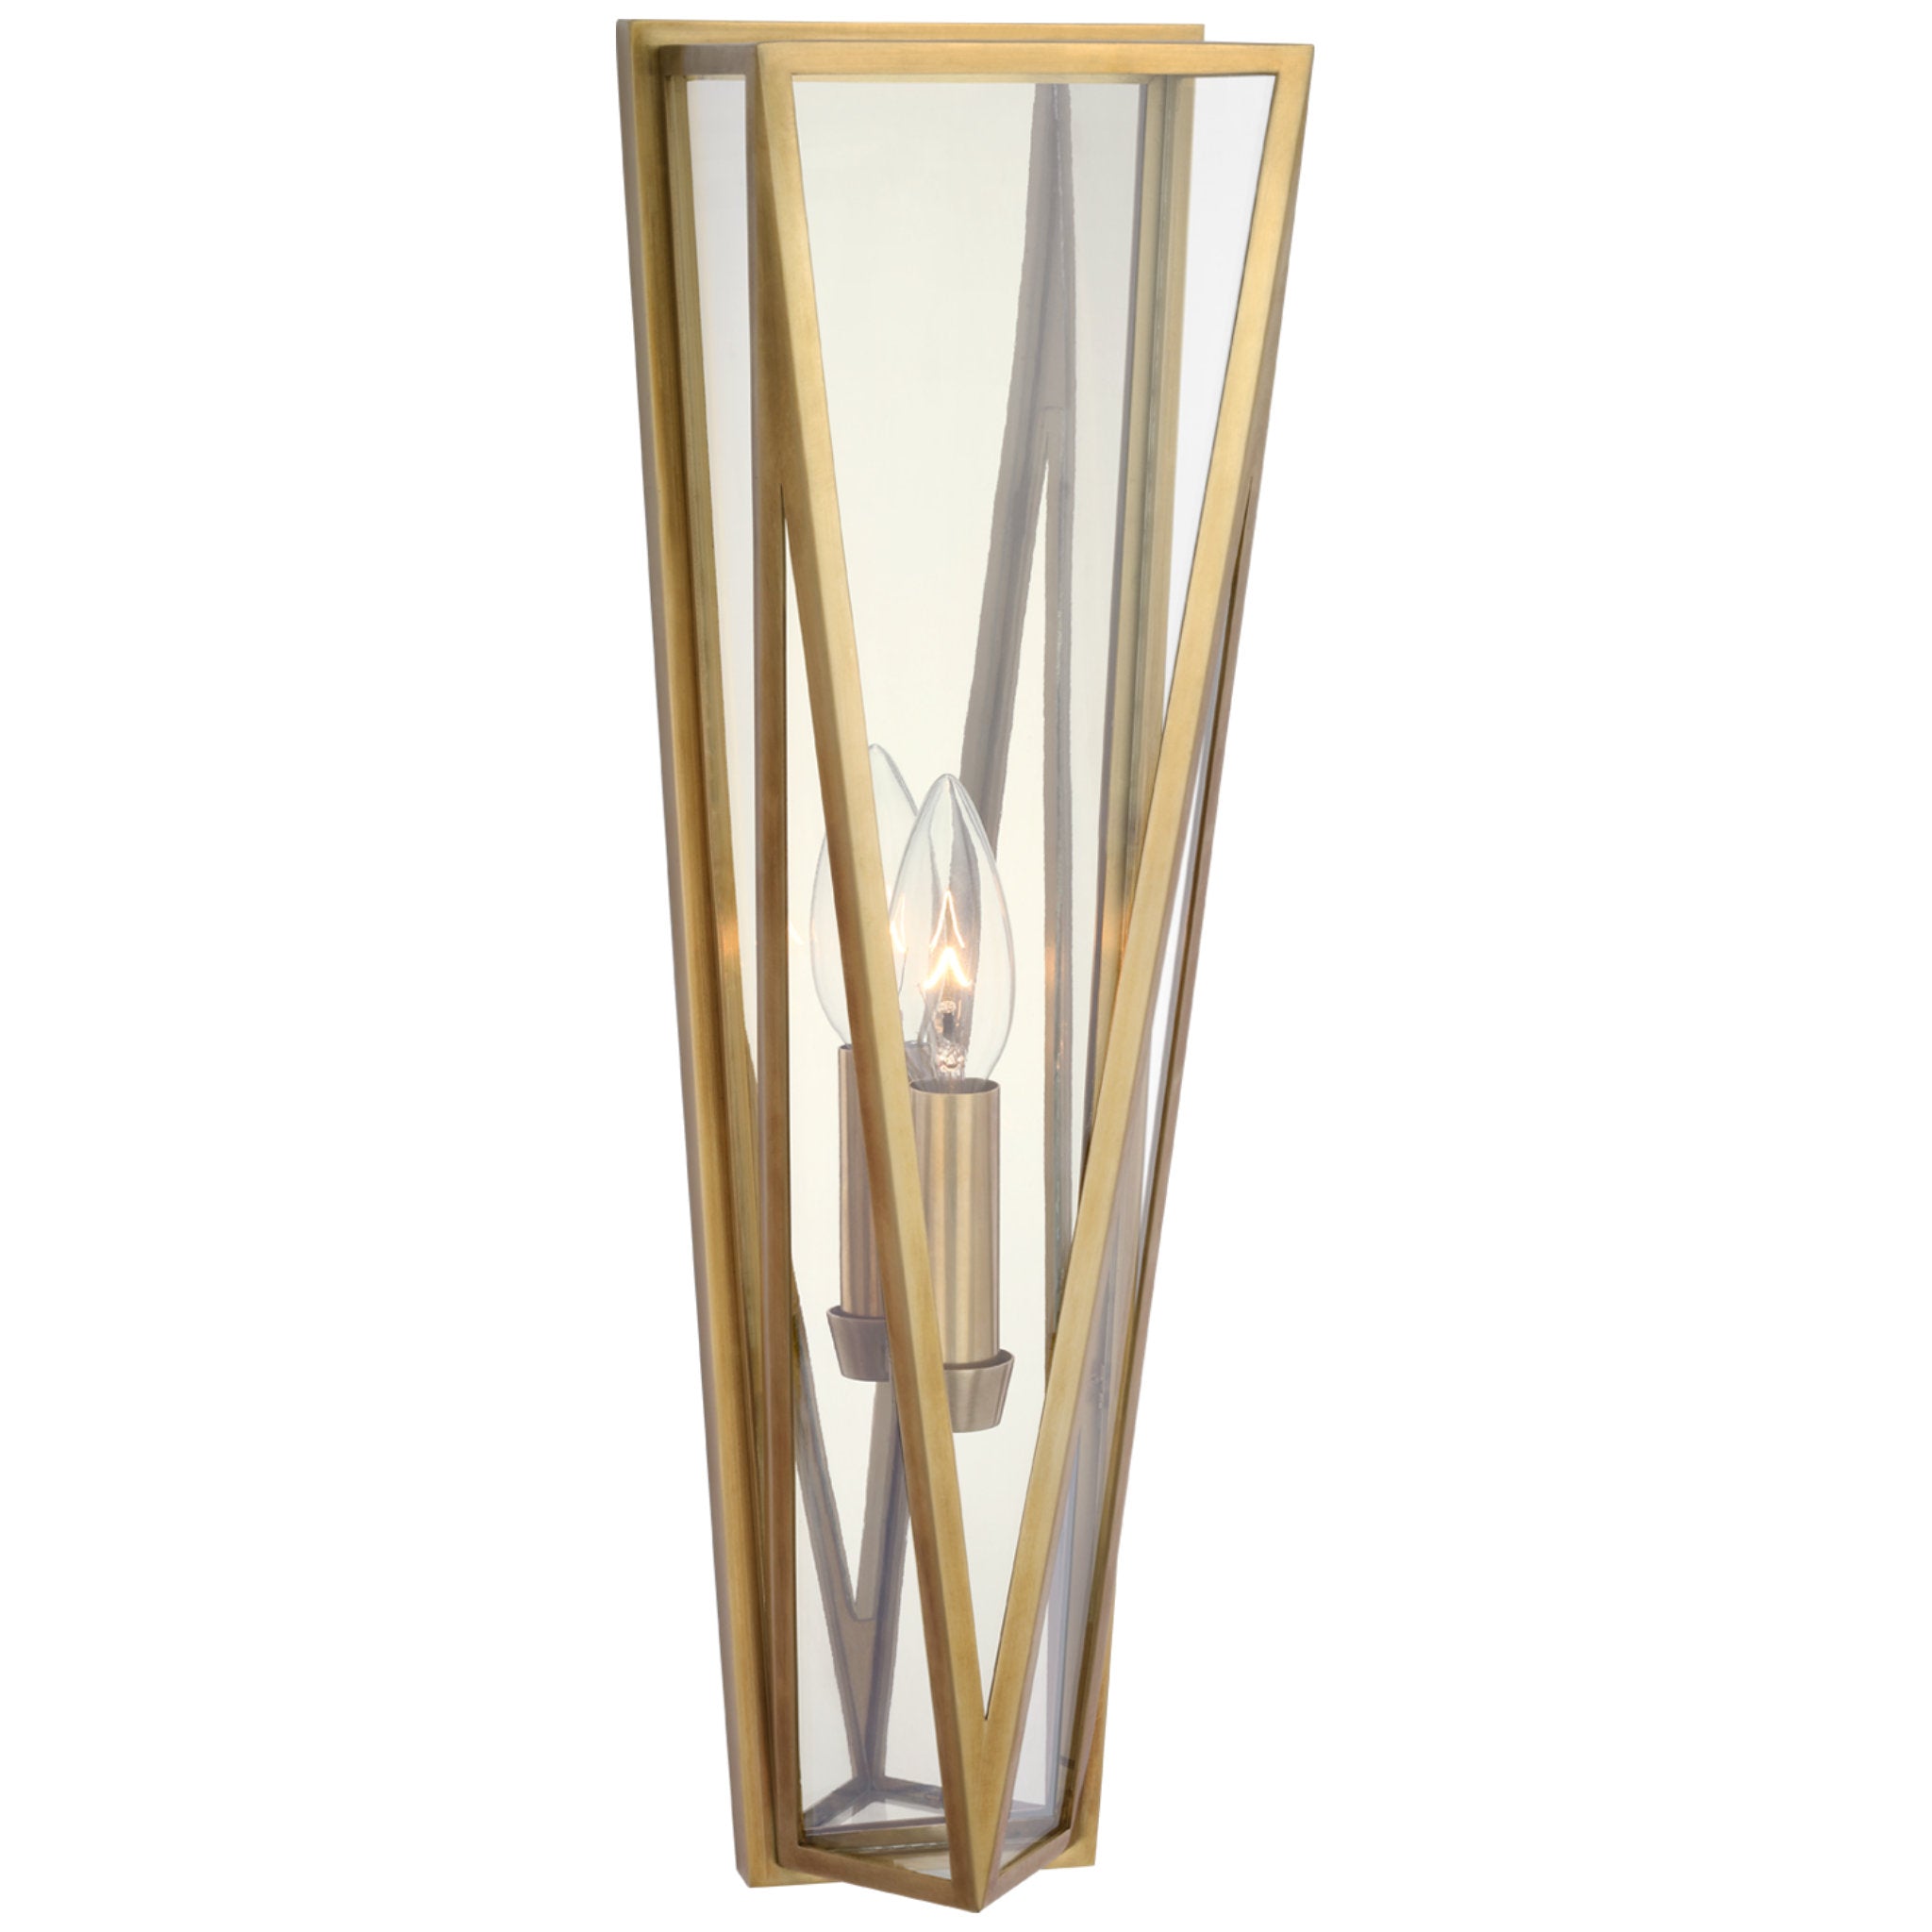 Julie Neill Lorino Medium Sconce in Hand-Rubbed Antique Brass with Clear Glass